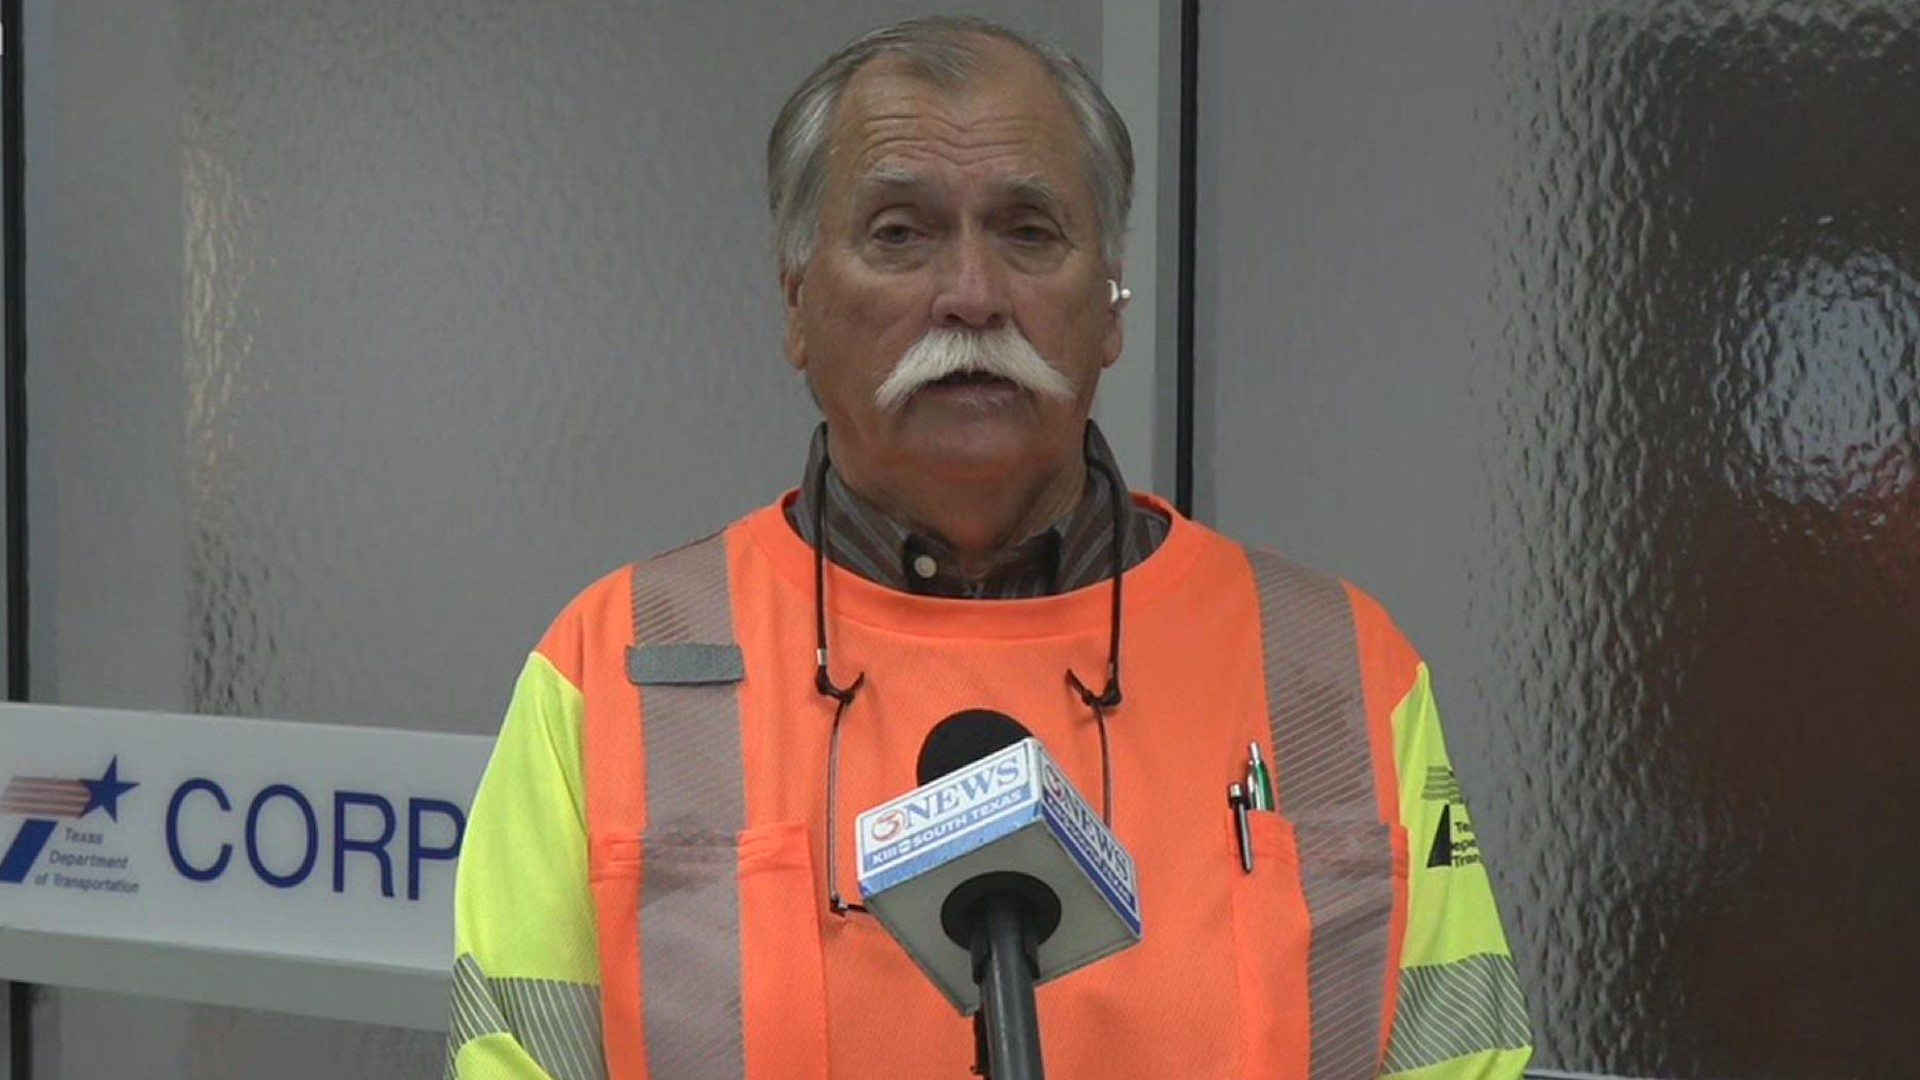 Live interview with Rickey Dailey about cold road preparations and safe driving practices.